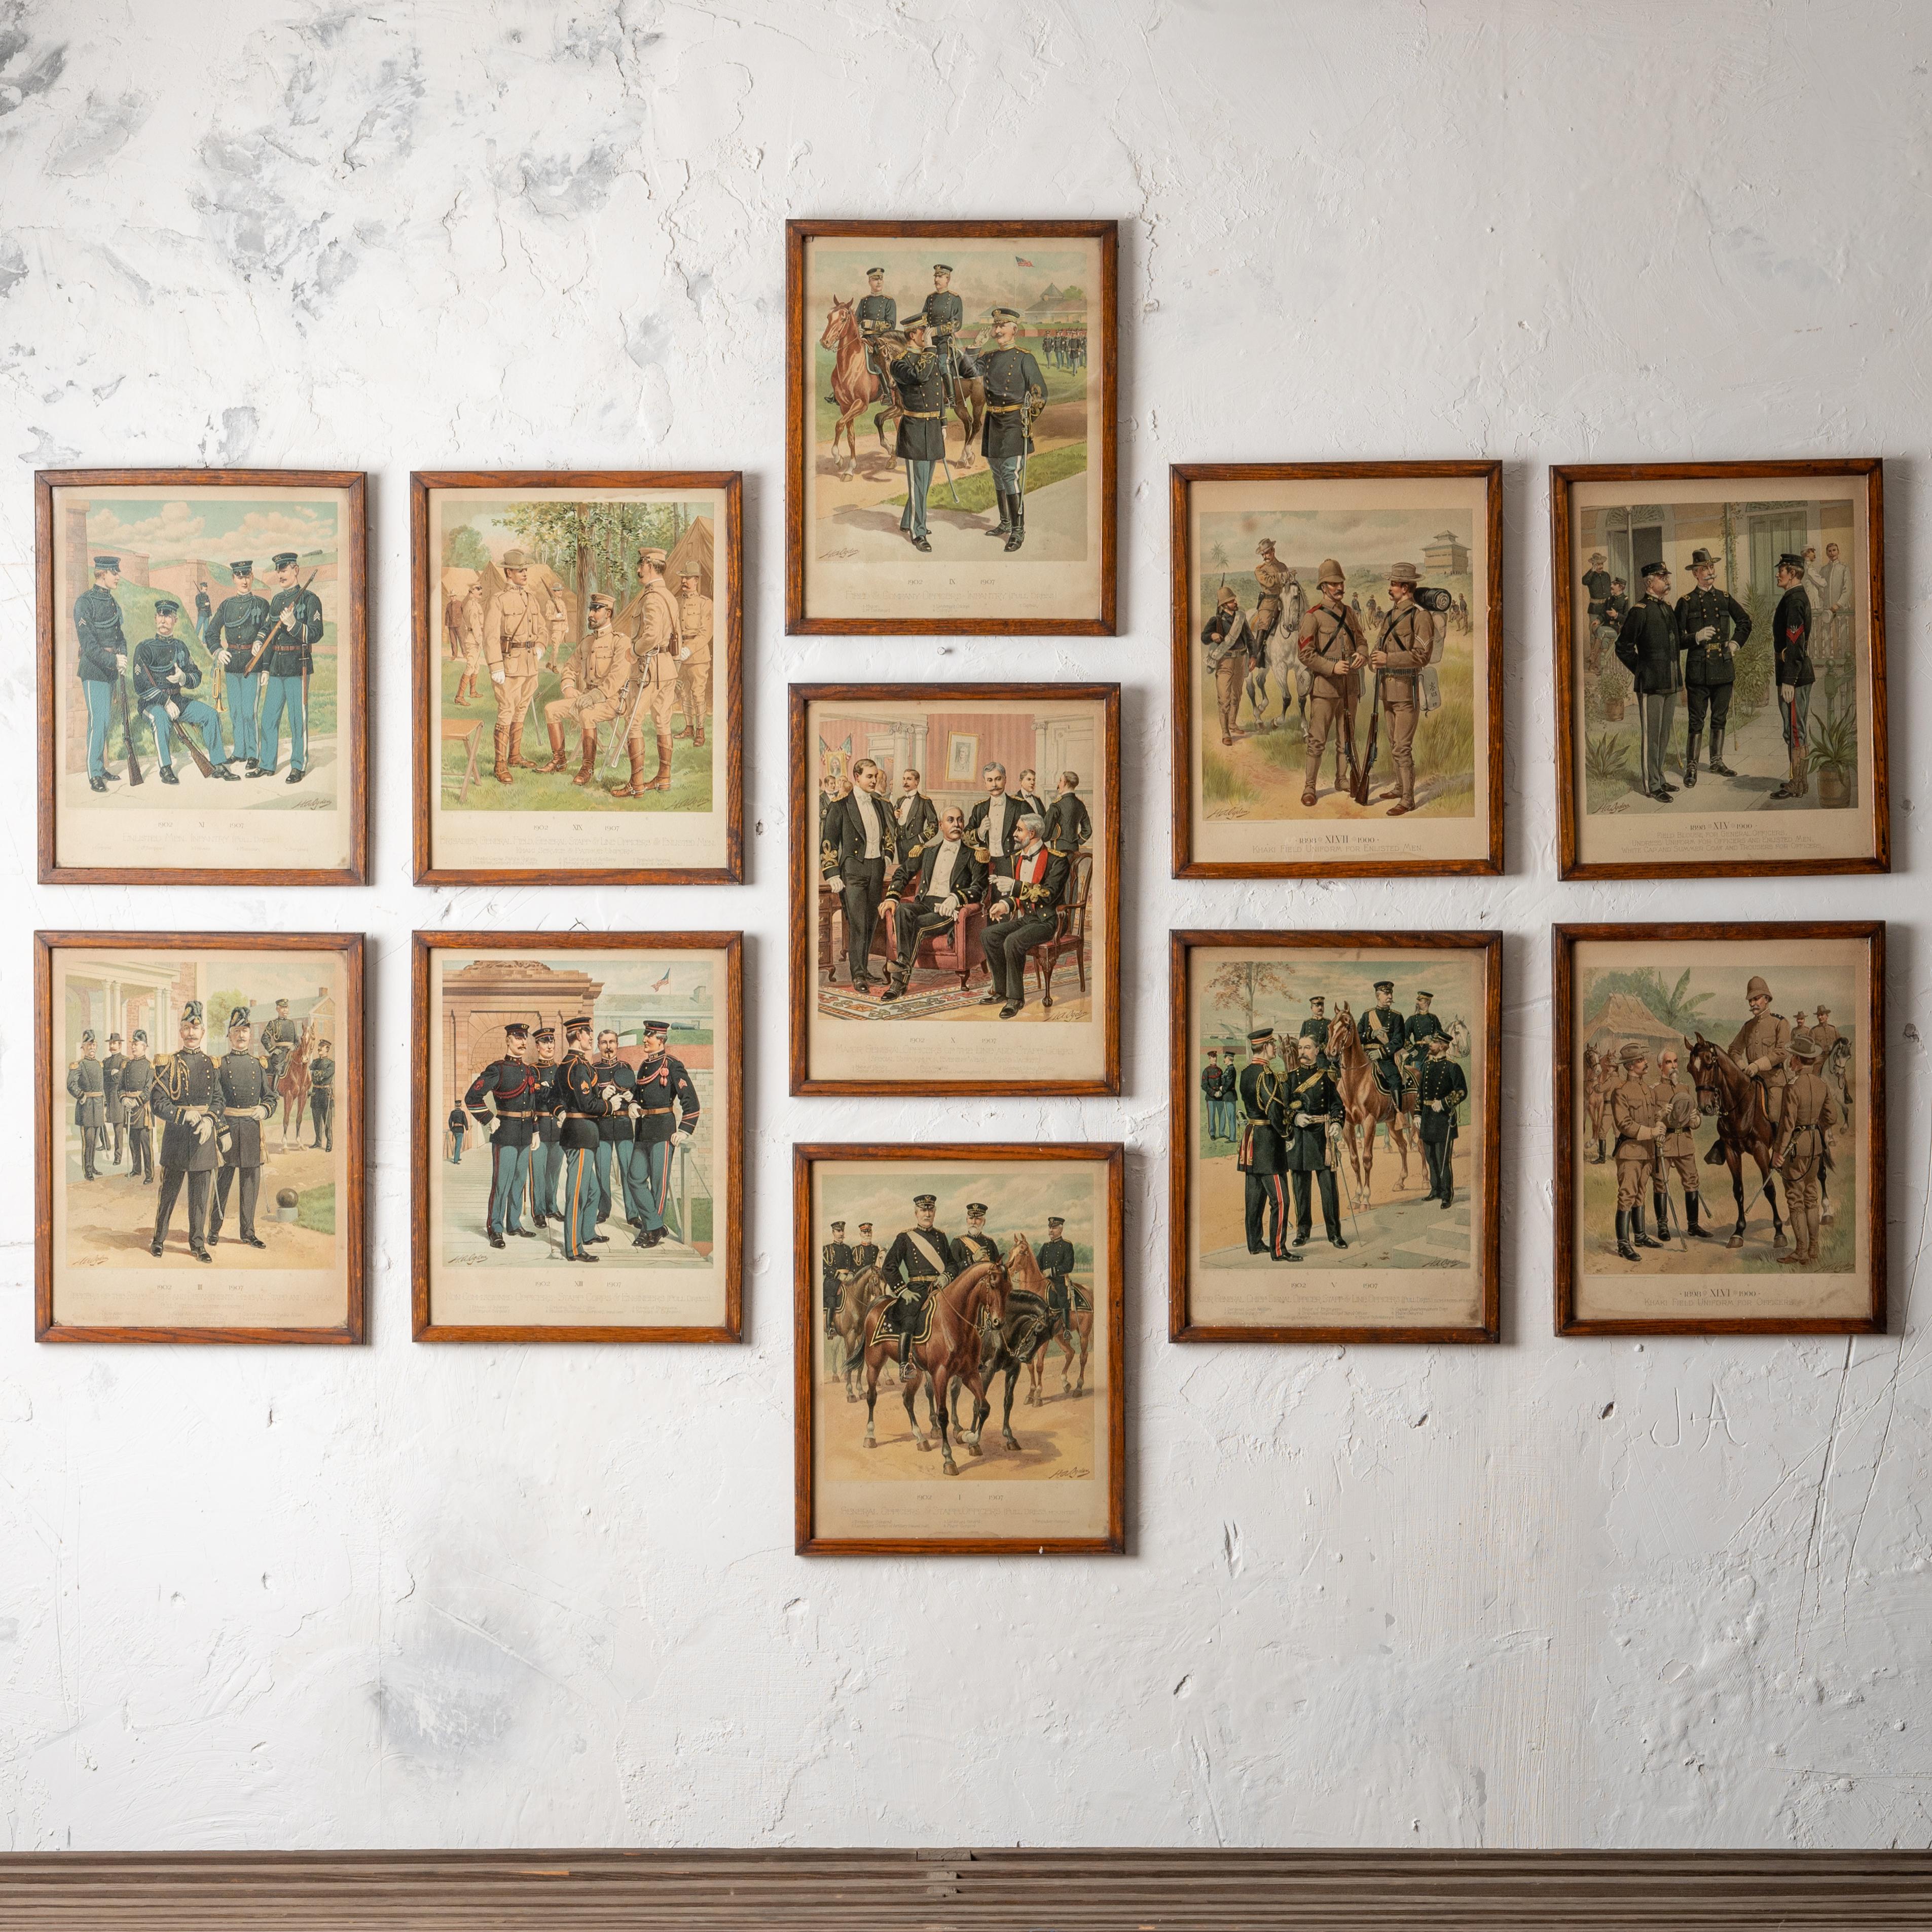 A set of 11 H.A. Ogden chromolithographs depicting U.S. Military uniforms in period frames, circa 1908.

14 by 17 ½ inches; ¾ inches deep

